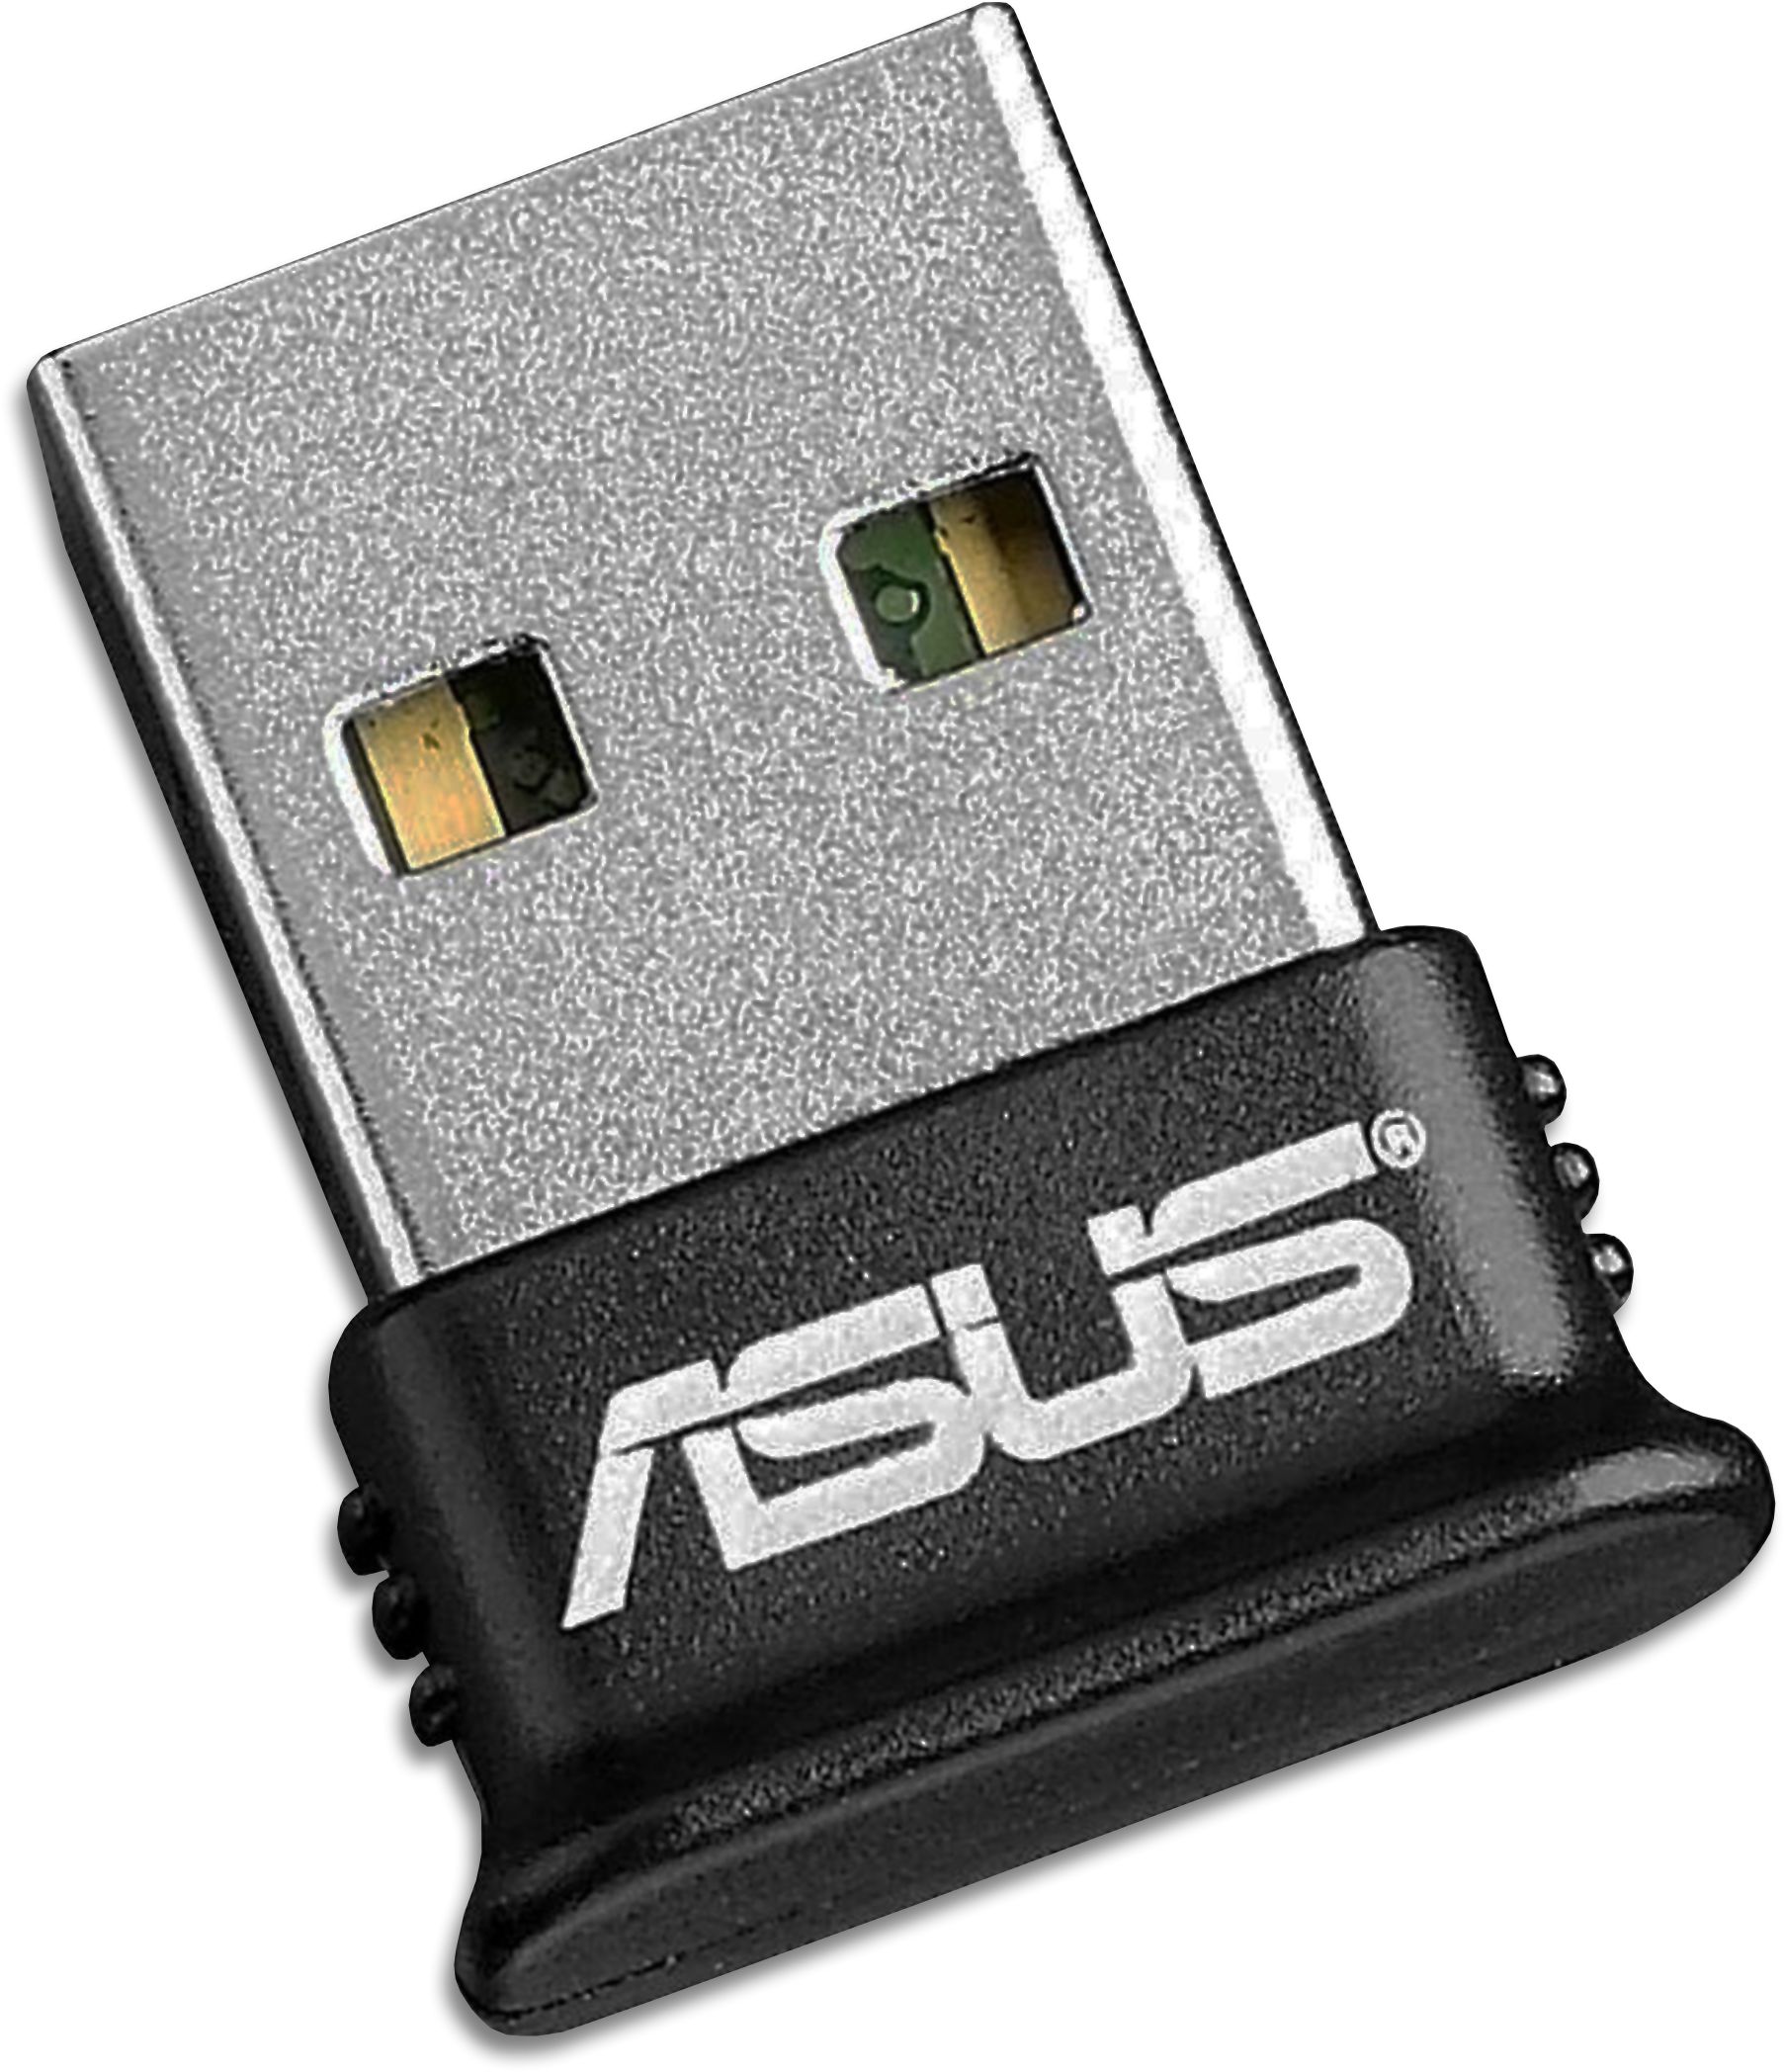 asus wireless driver install